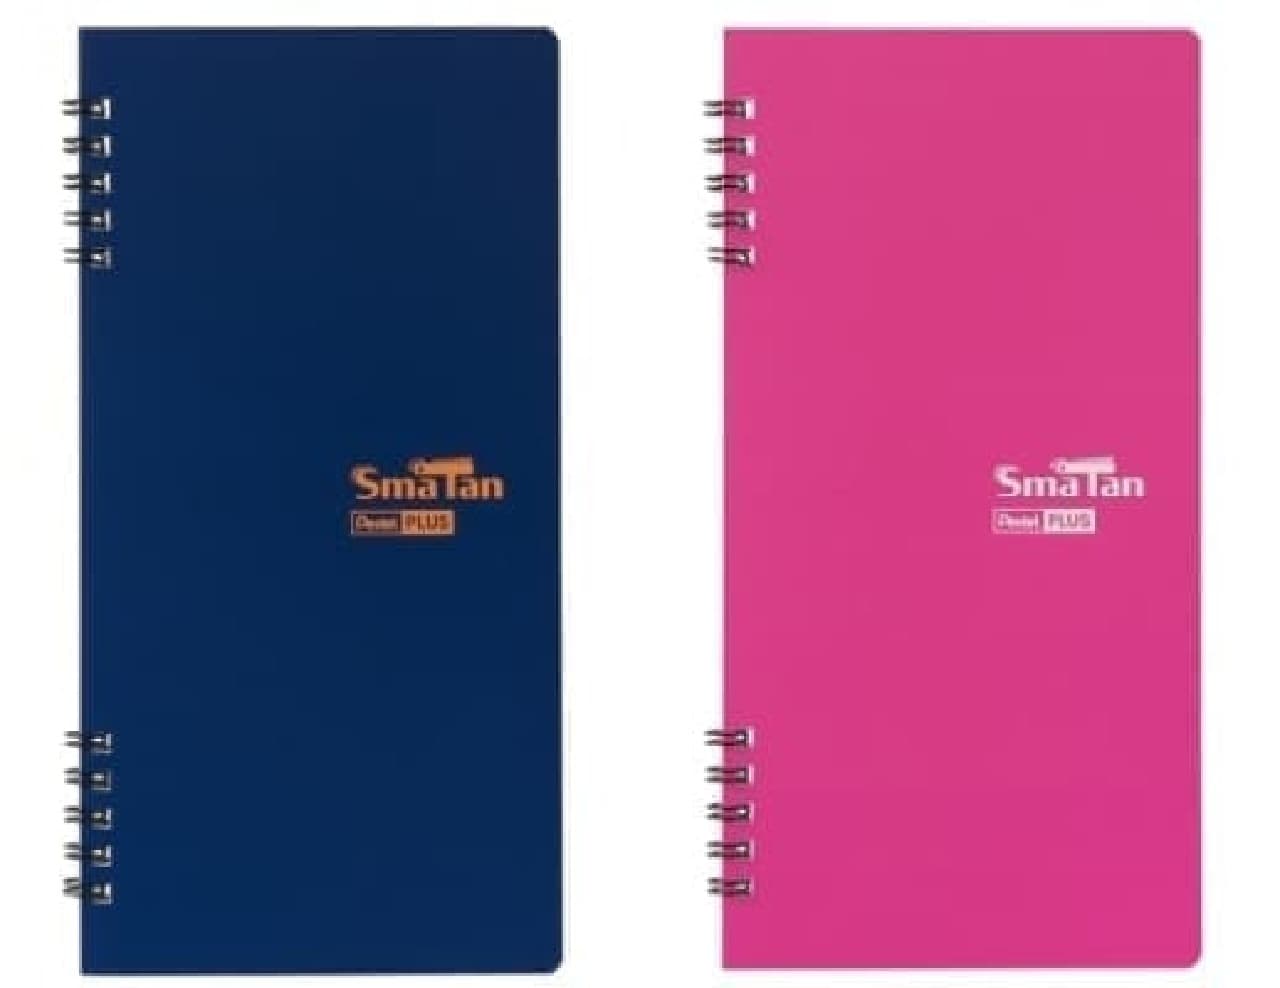 With the cooperation of PLUS Corporation, the notebook is based on "Ka. Clie".